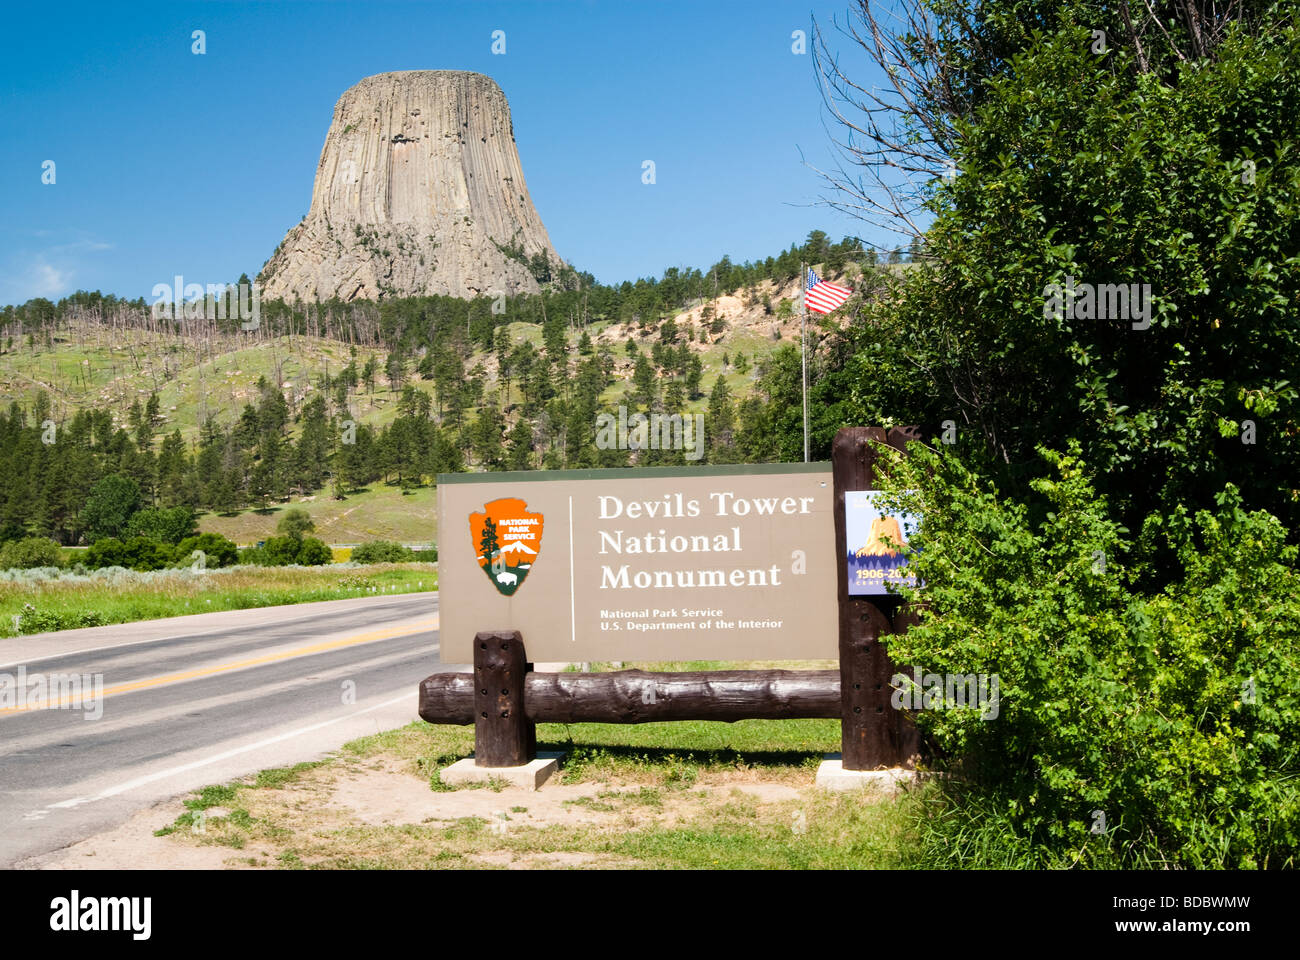 Blick vom Eingang am Devils Tower National Monument in Wyoming Stockfoto